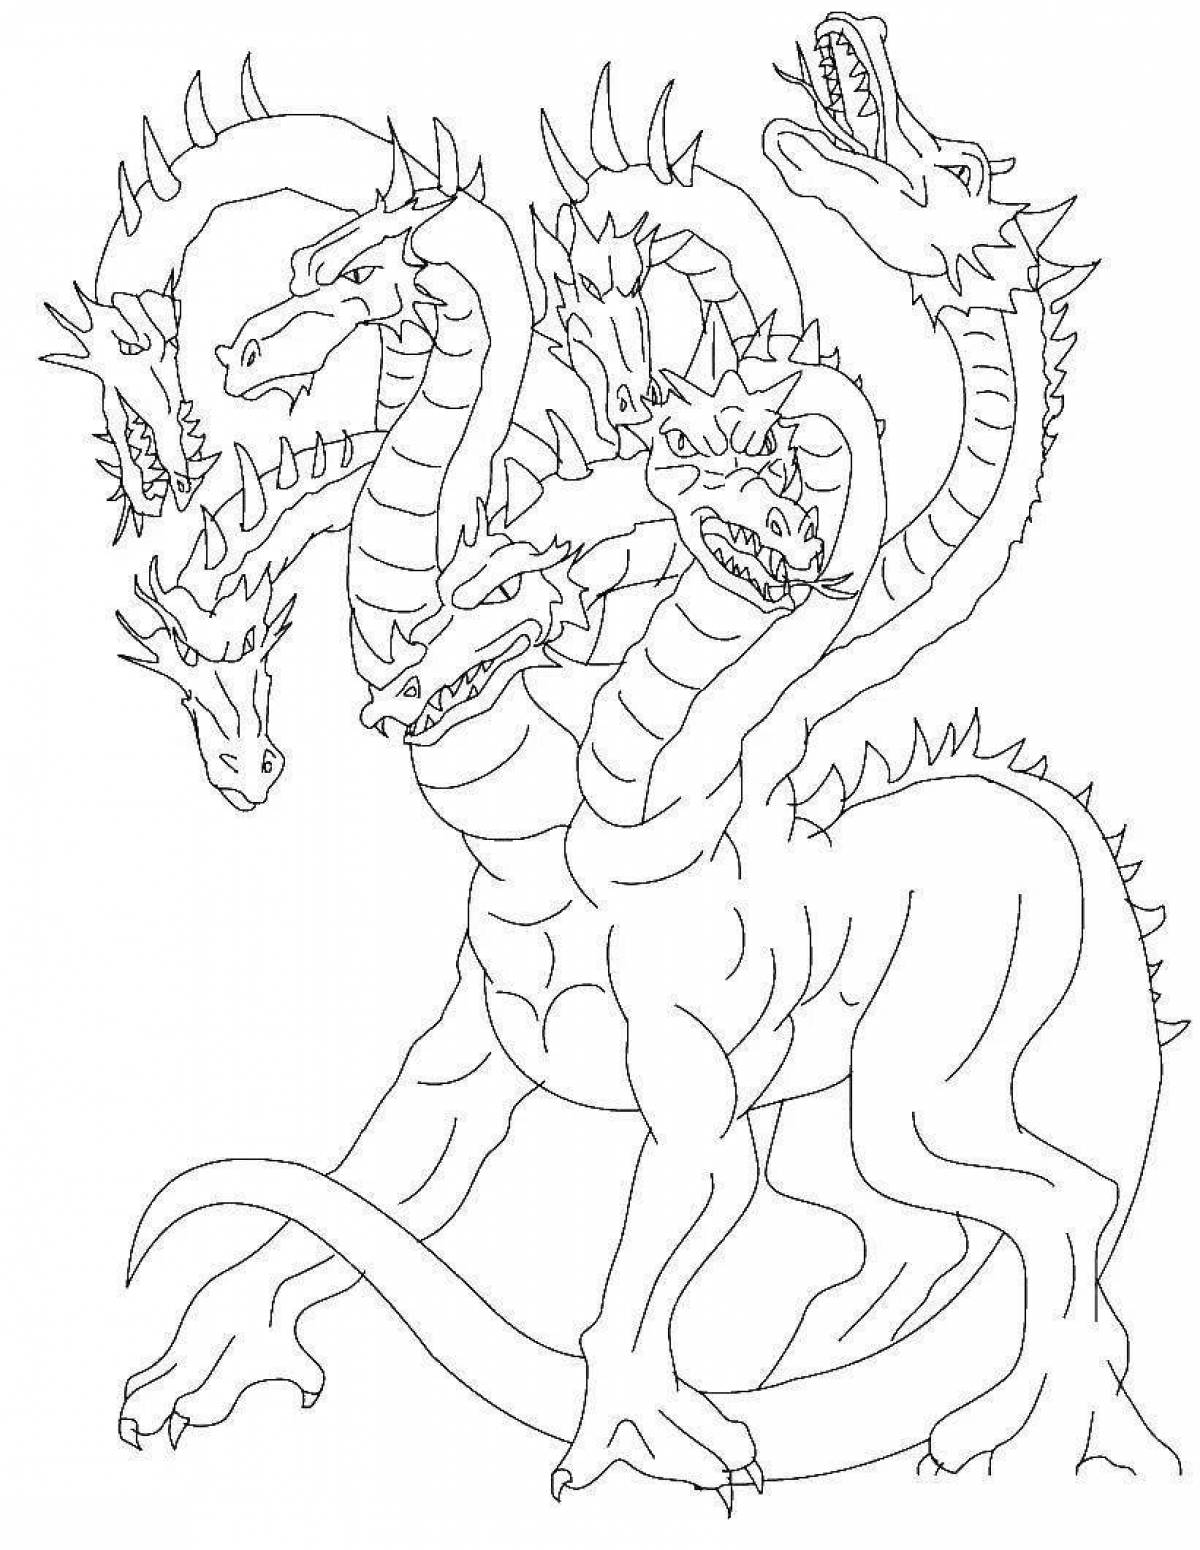 Giant three-headed dragon coloring page